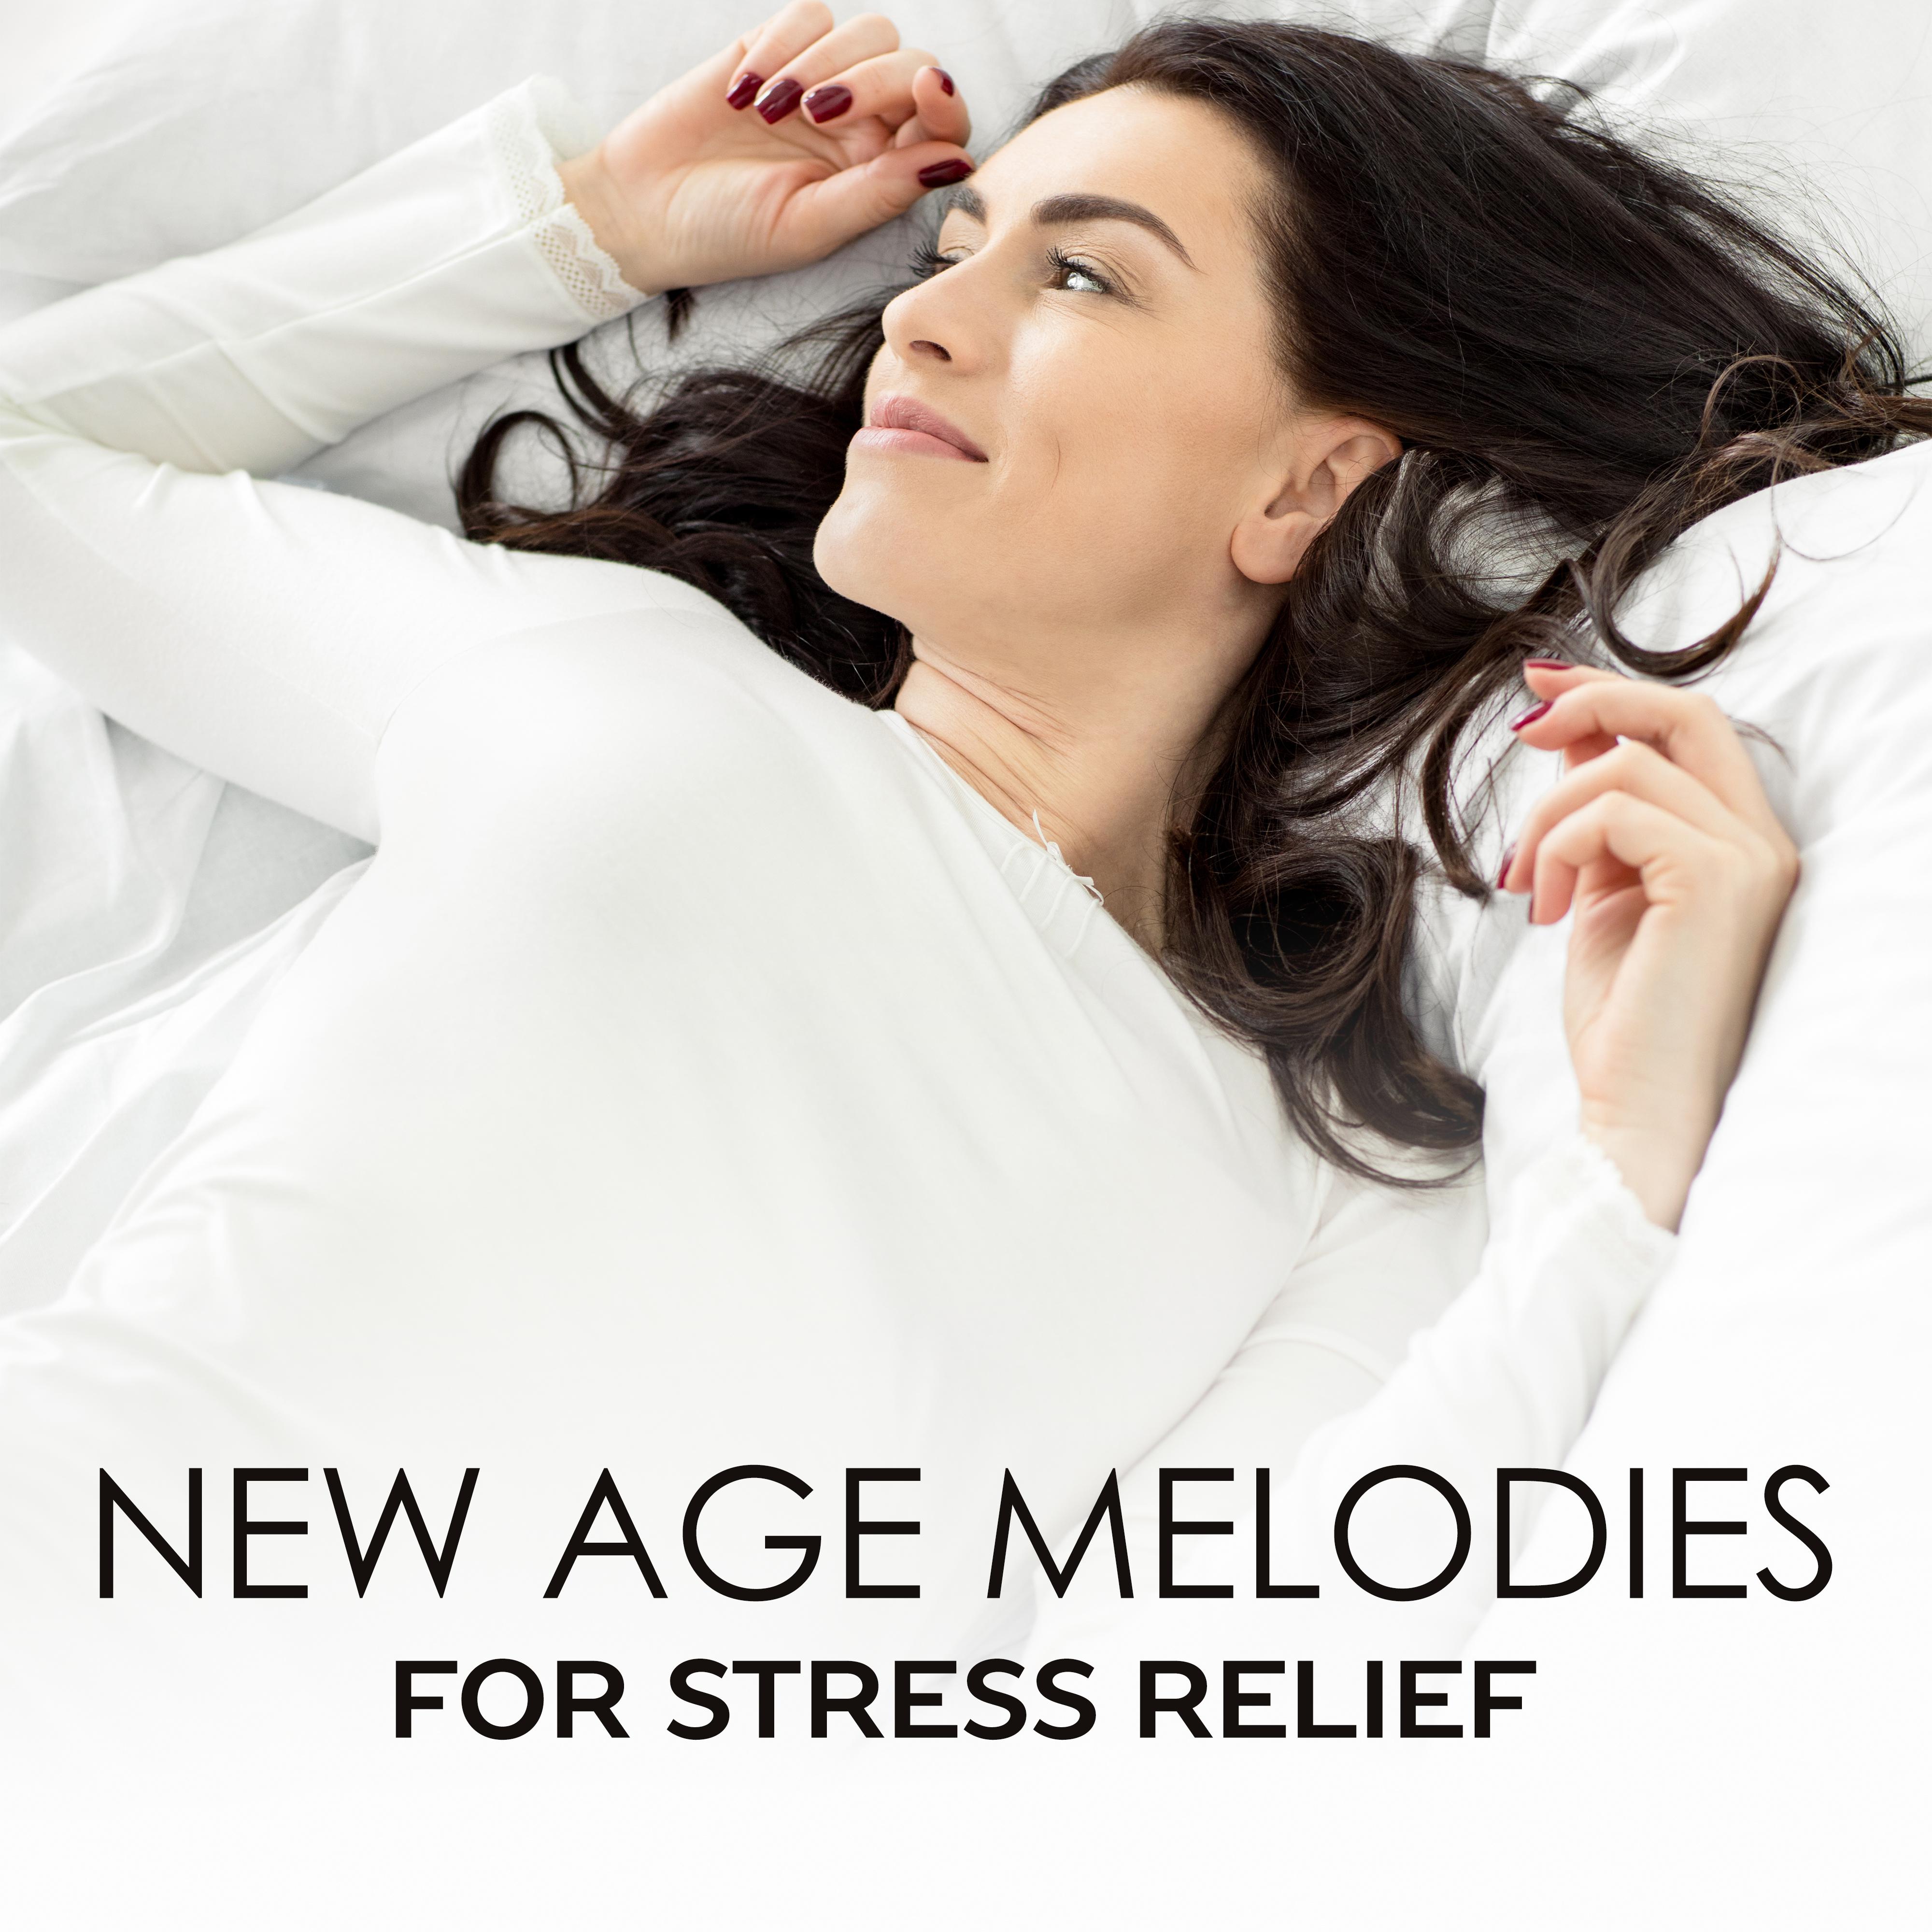 New Age Melodies for Stress Relief